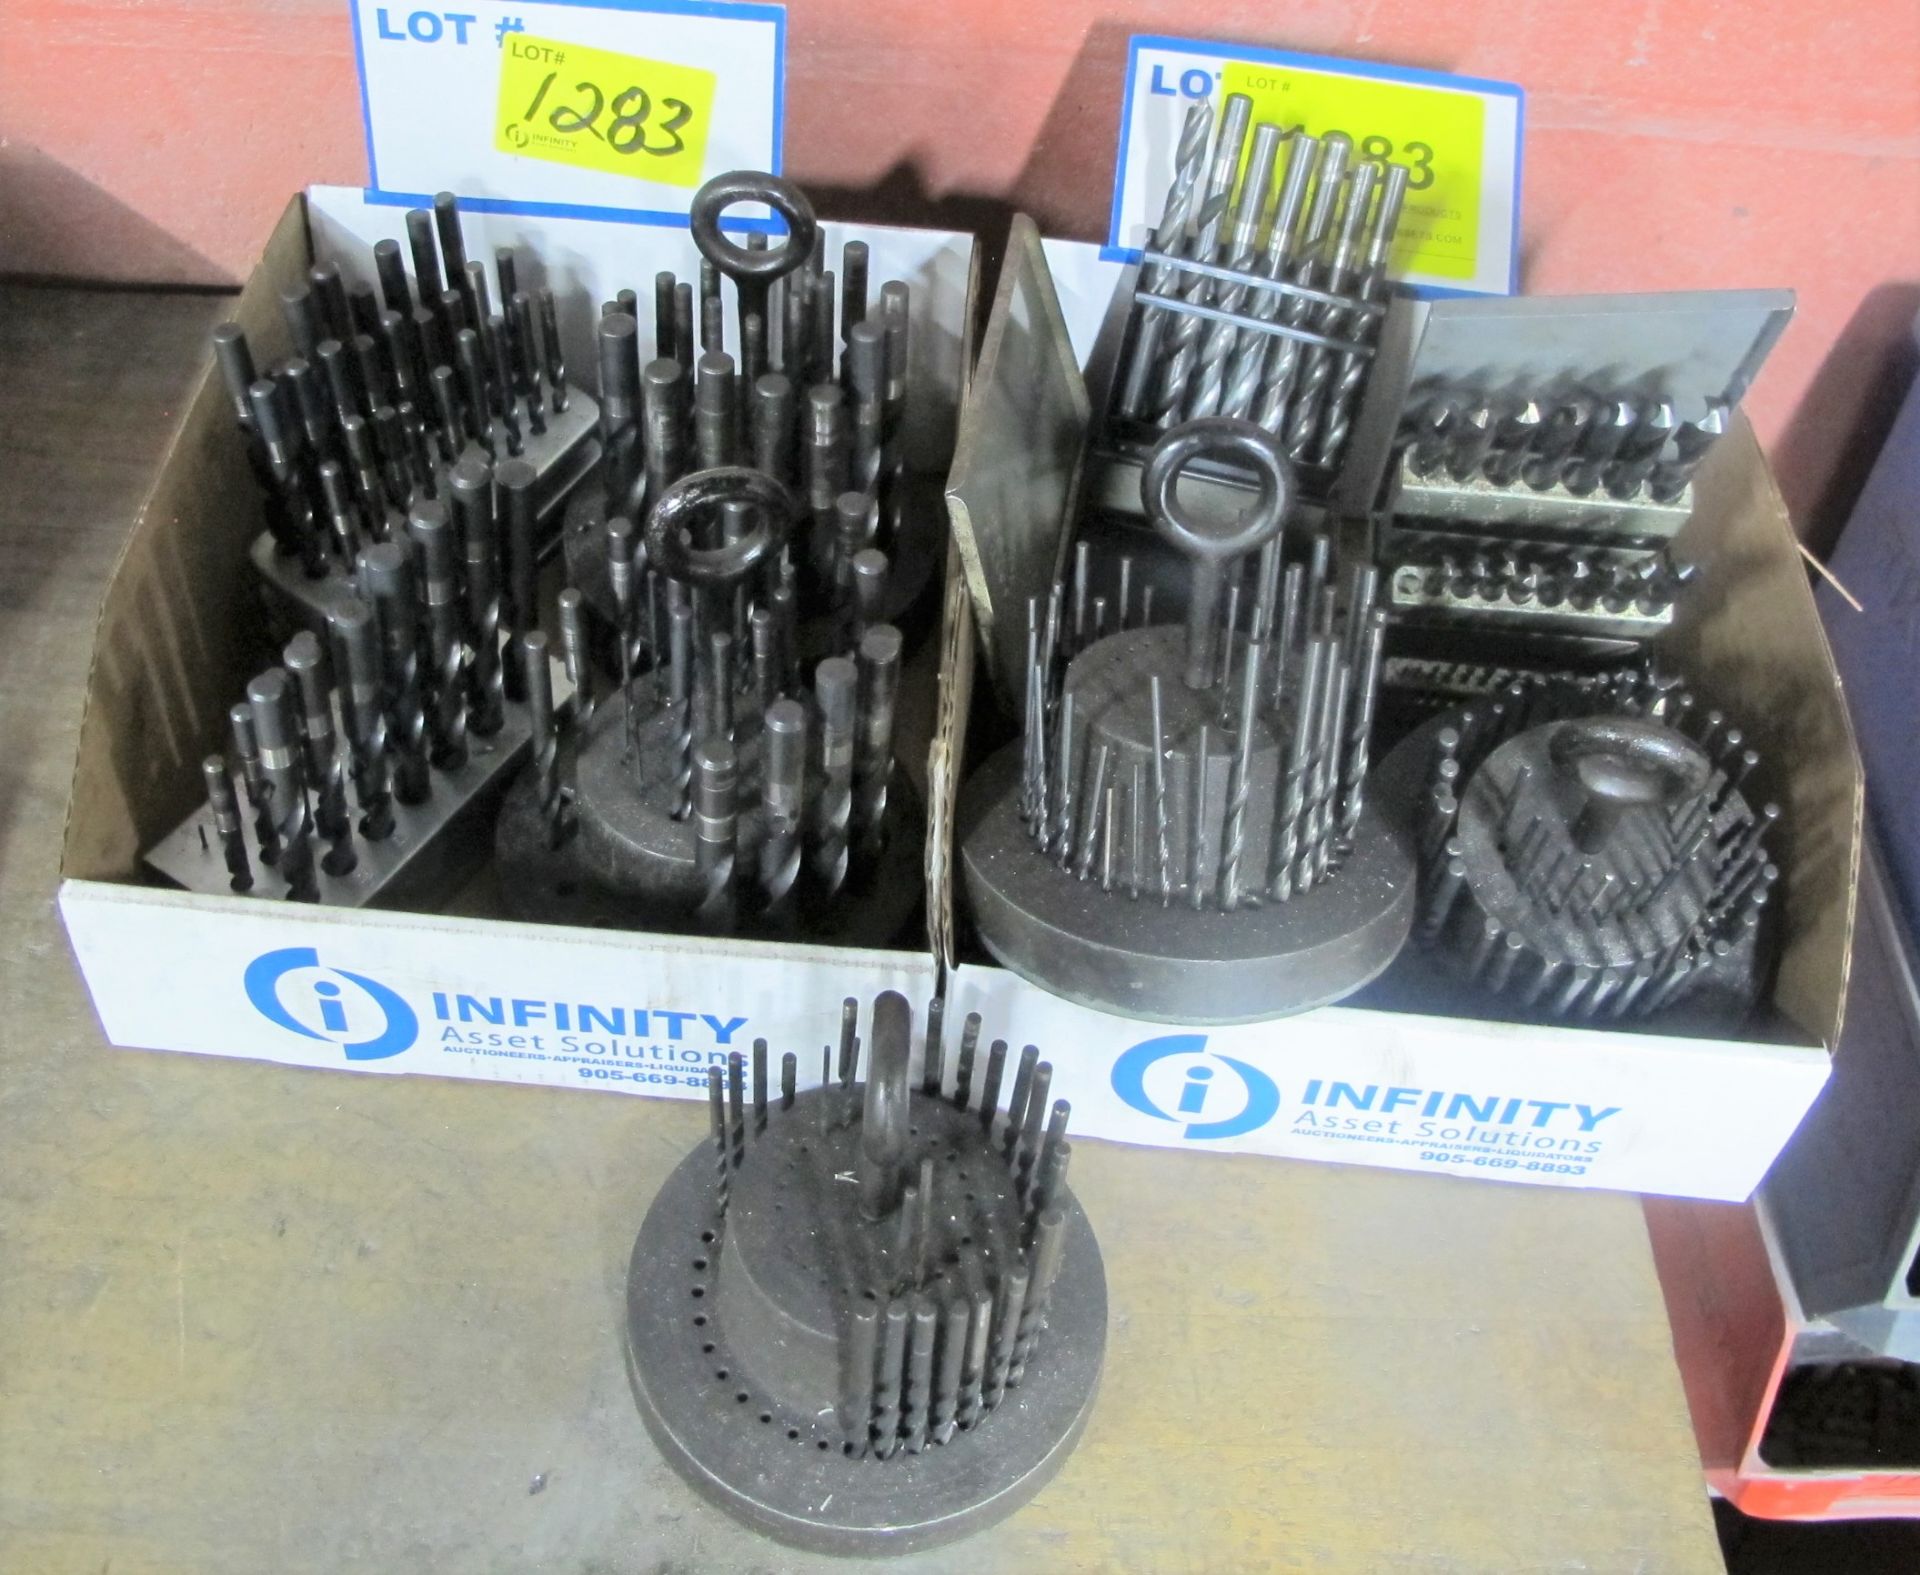 LOT OF (2) BOXES OF HIGH SPEED DRILL BIT KITS